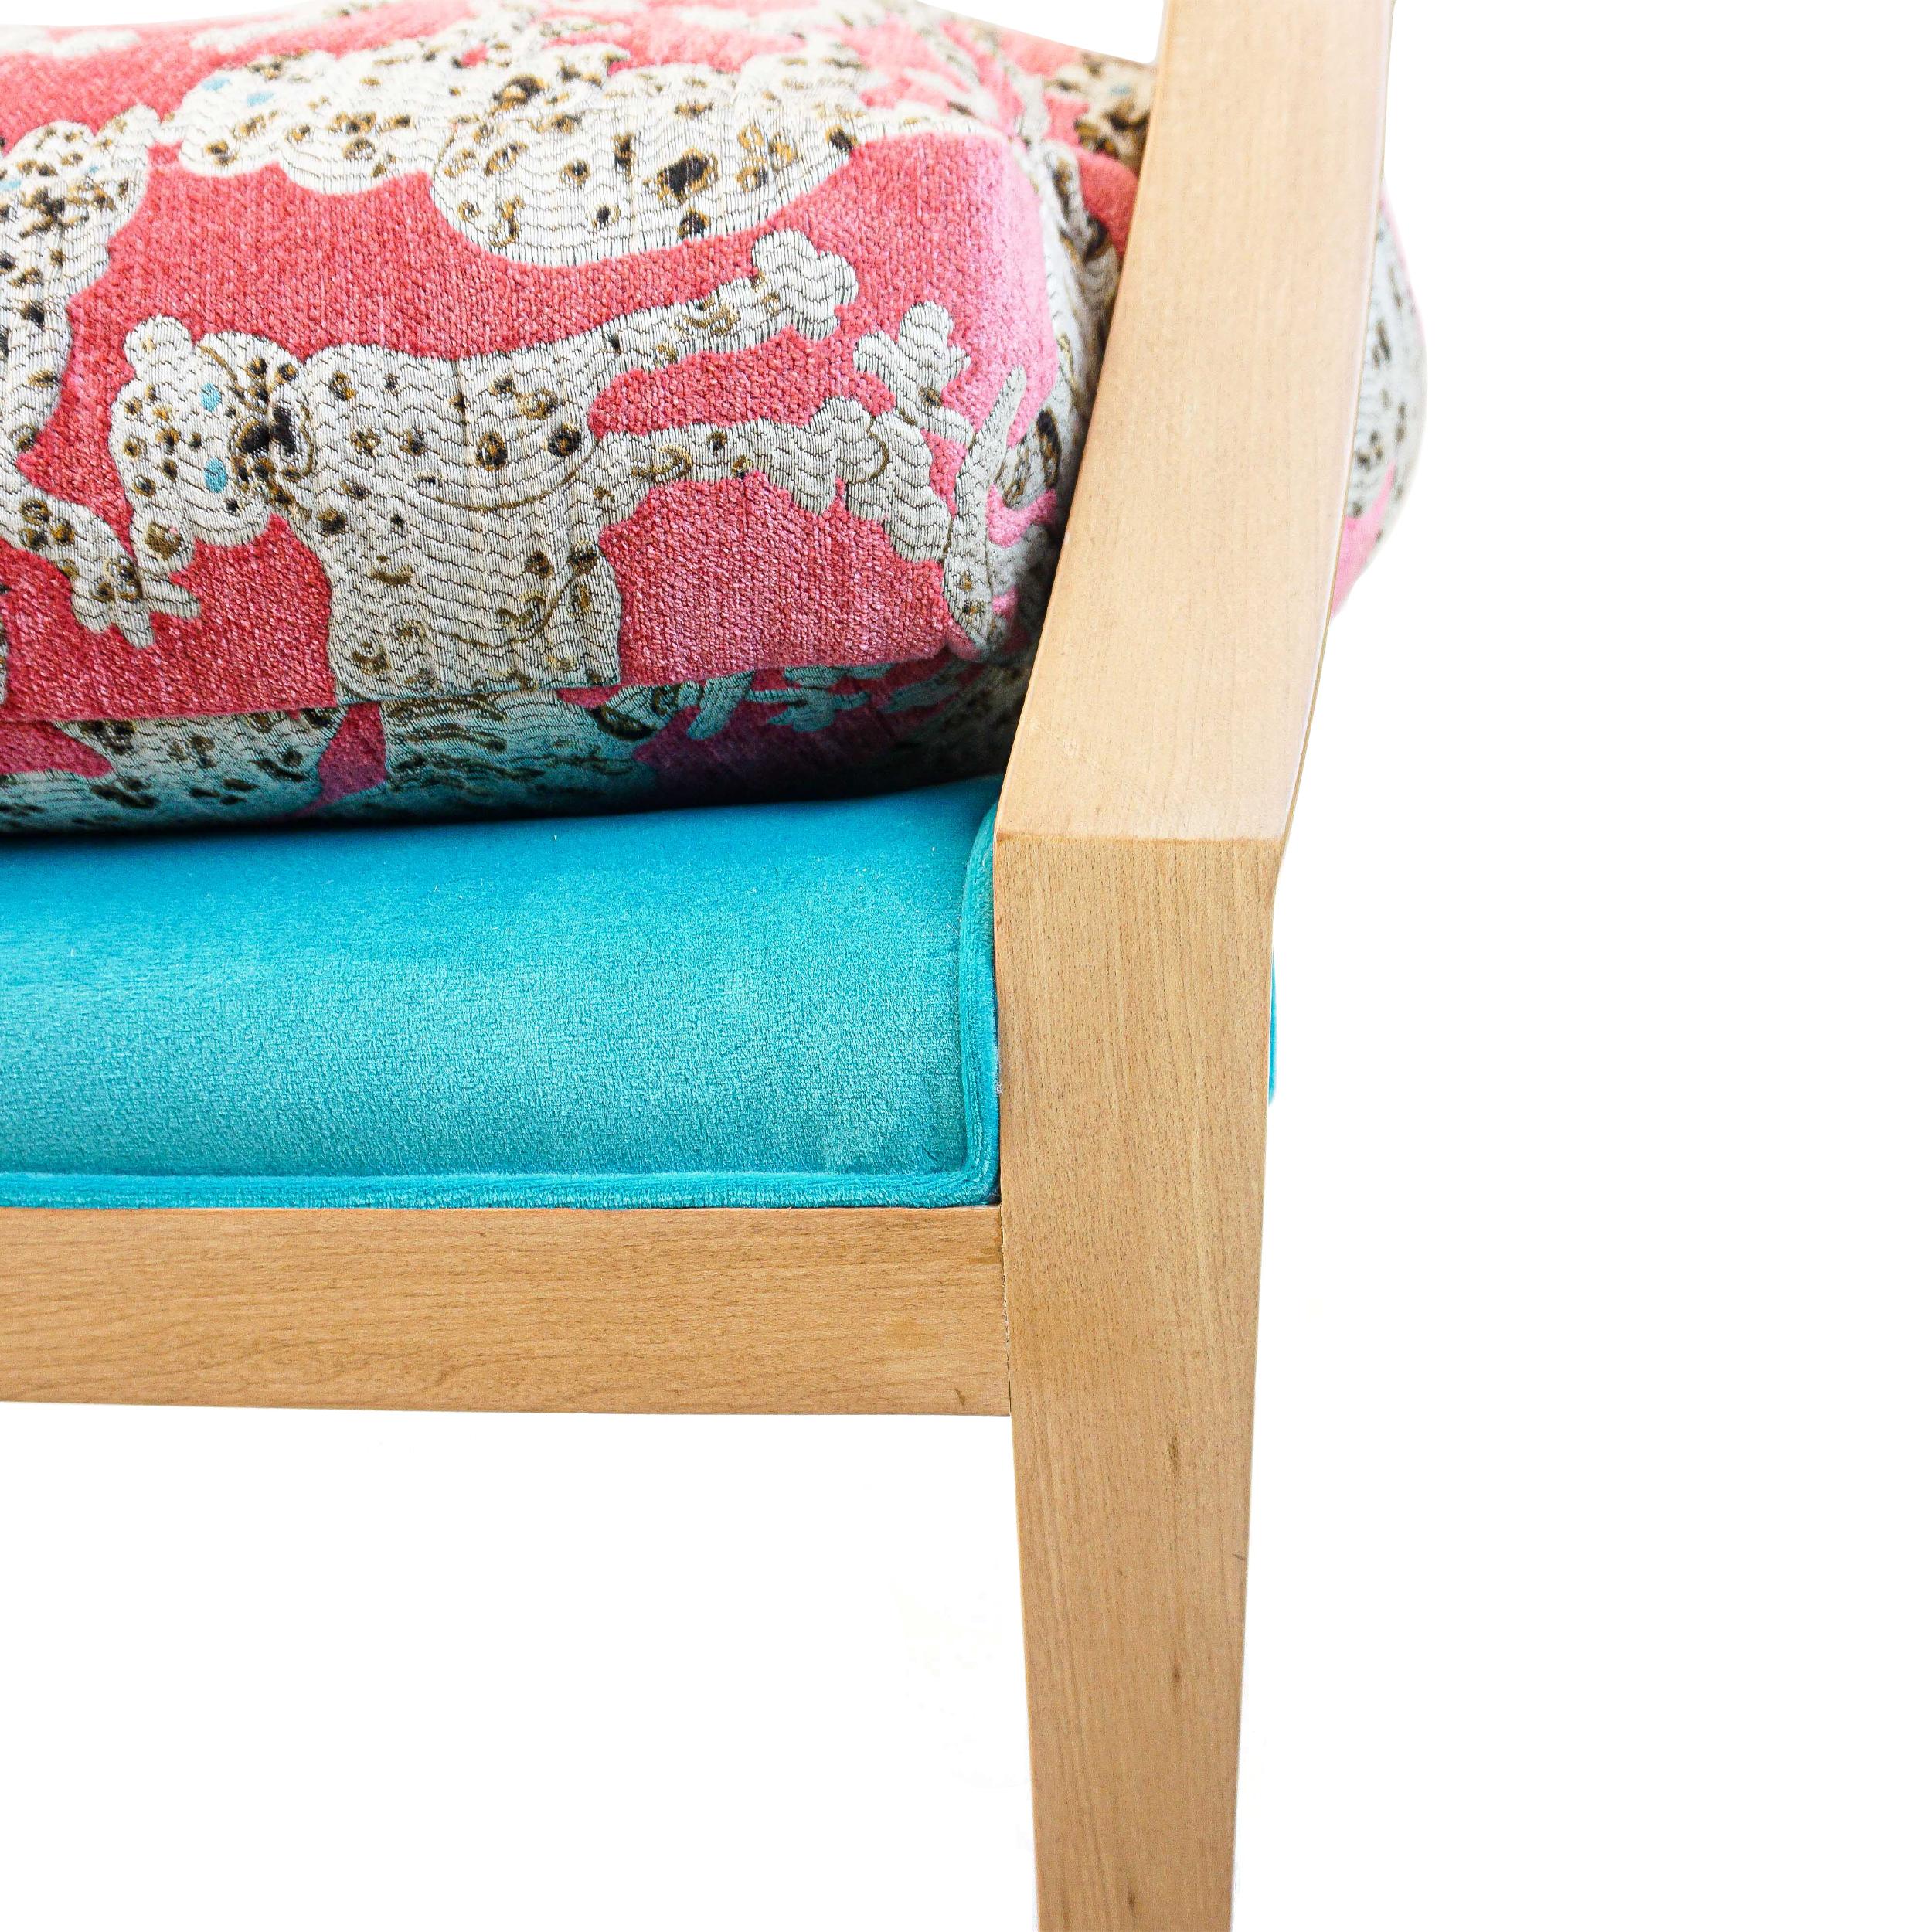 Japanese Inspired Bench with Wild Cat Print and Faux Fur For Sale 6